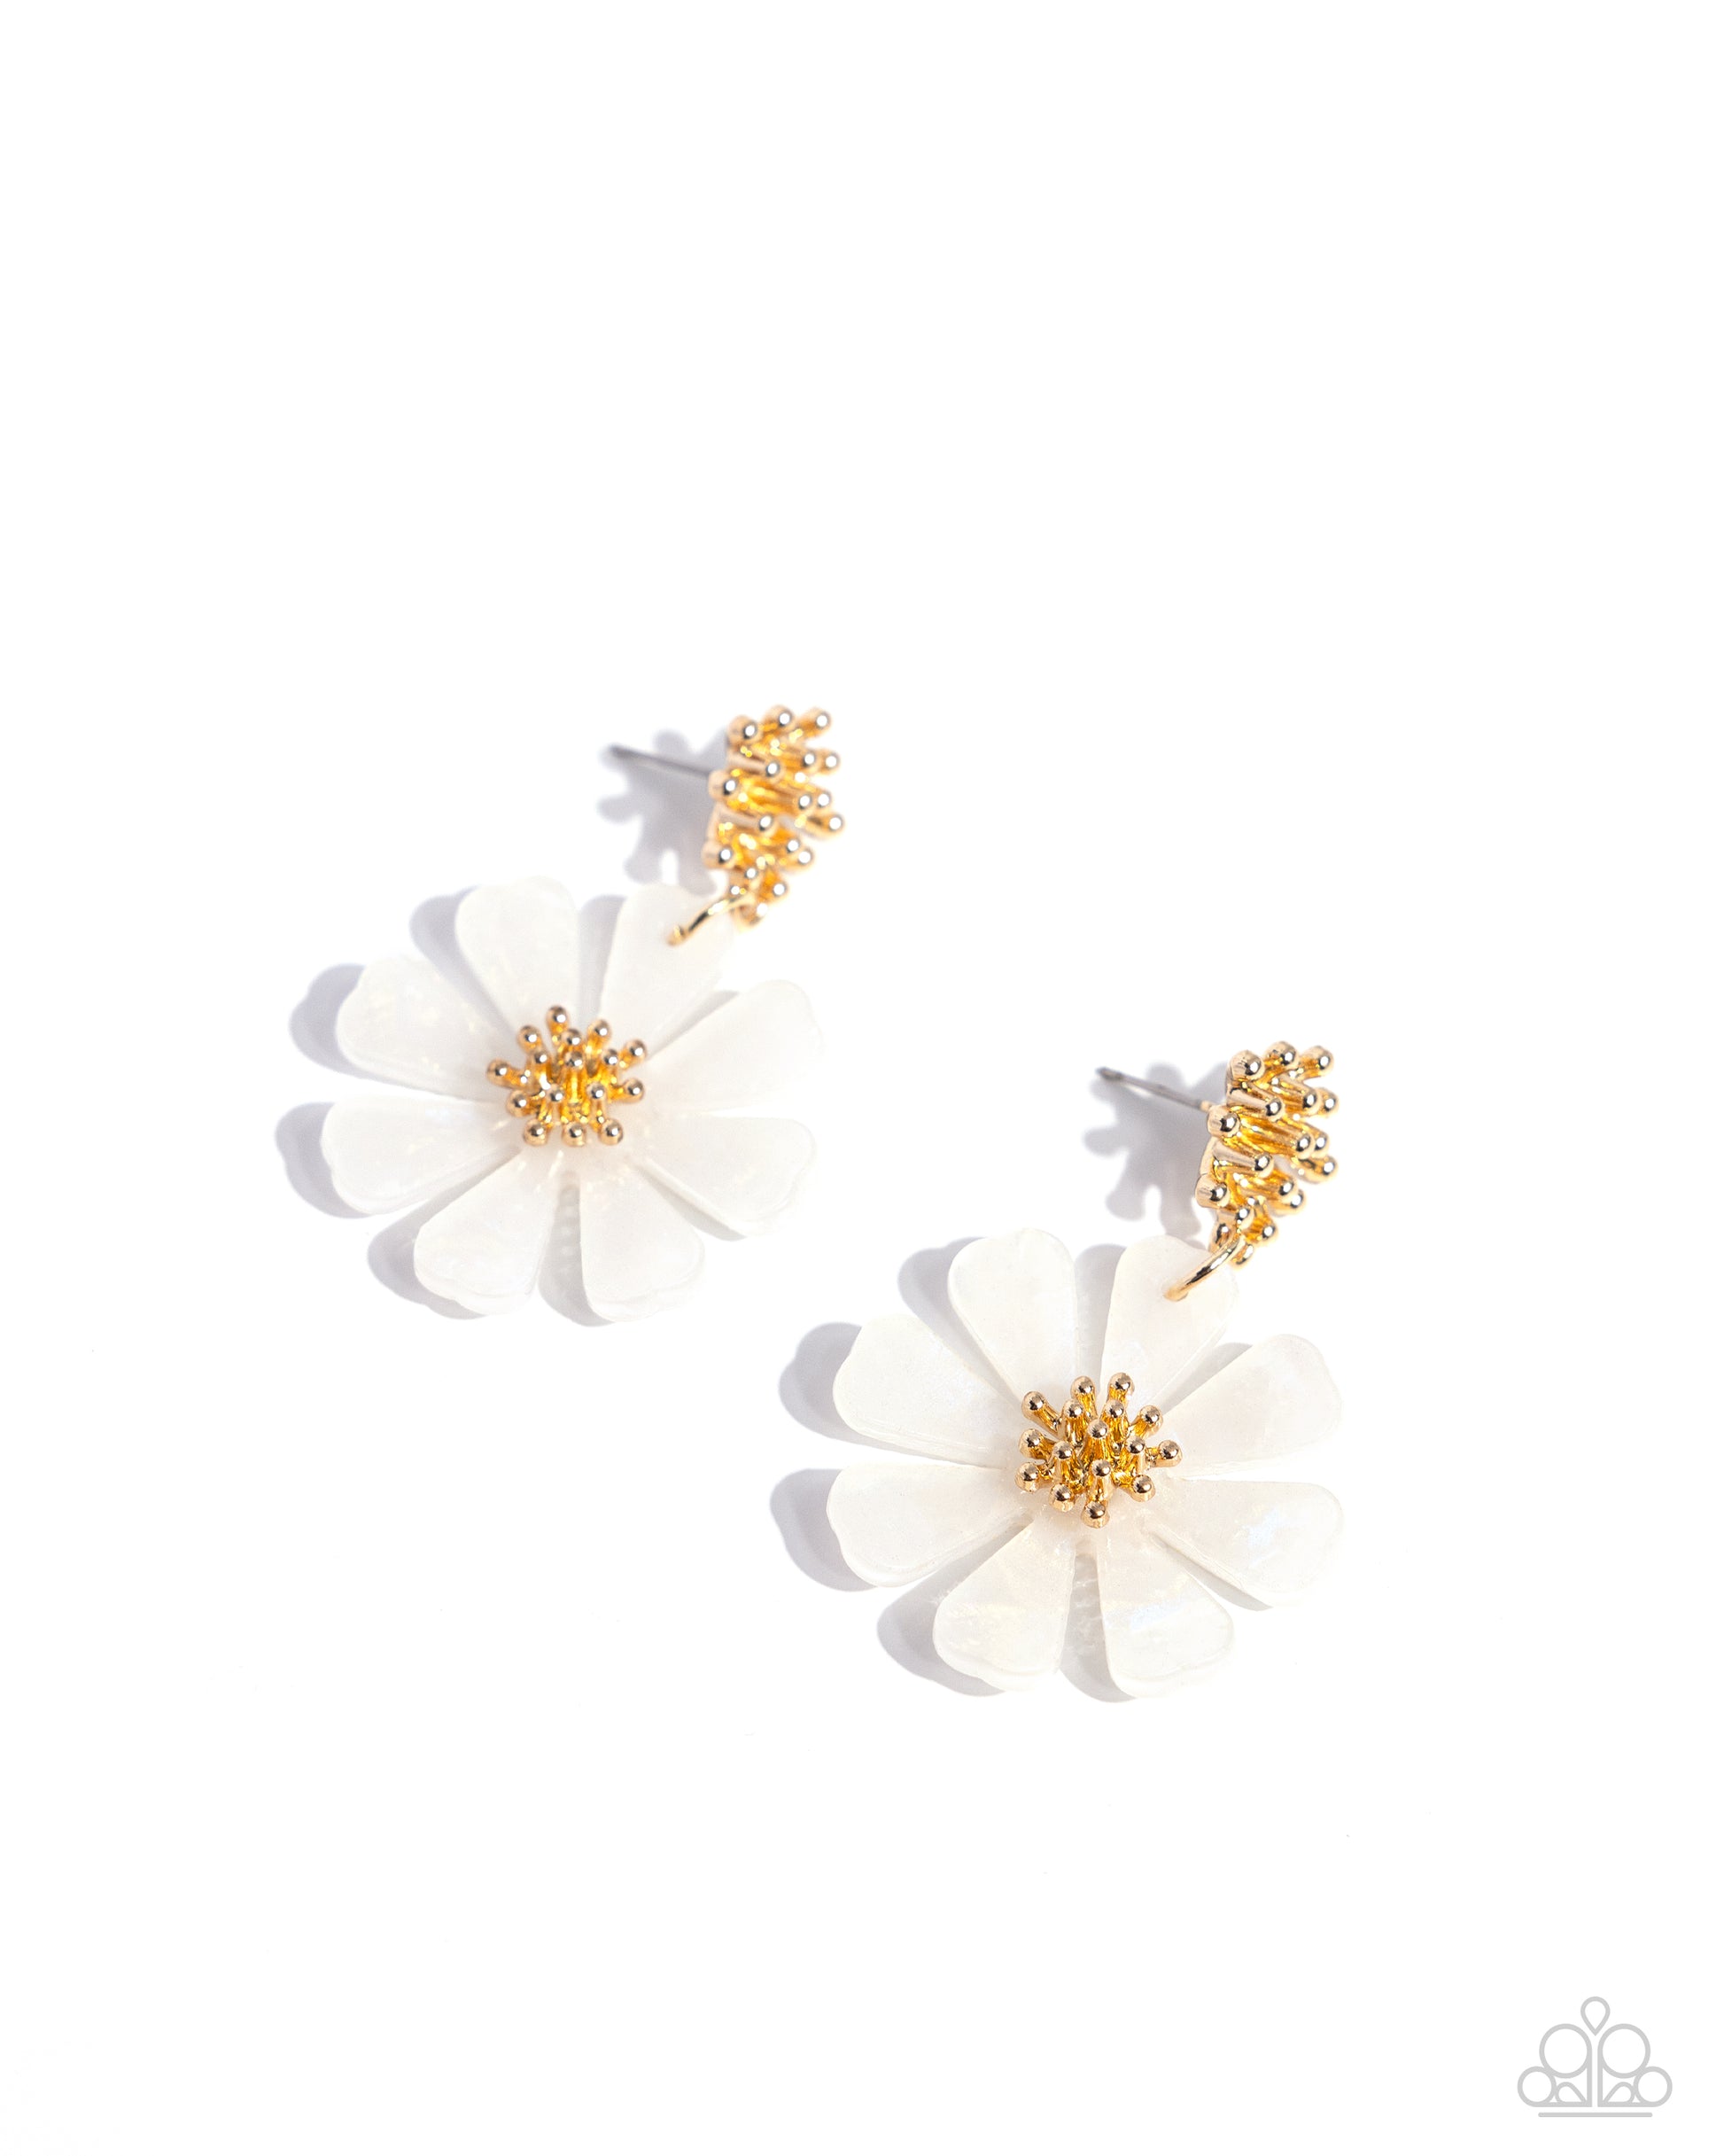 Poetically Pastel White Flower Post Earring - Paparazzi Accessories A collection of tactile gold studs gives way to an acrylic, pastel-patterned white flower that also blooms around a gold studded center, infusing the design with whimsical, soft movement. Earring attaches to a standard post fitting. Sold as one pair of post earrings. P5PO-WTXX-427AR